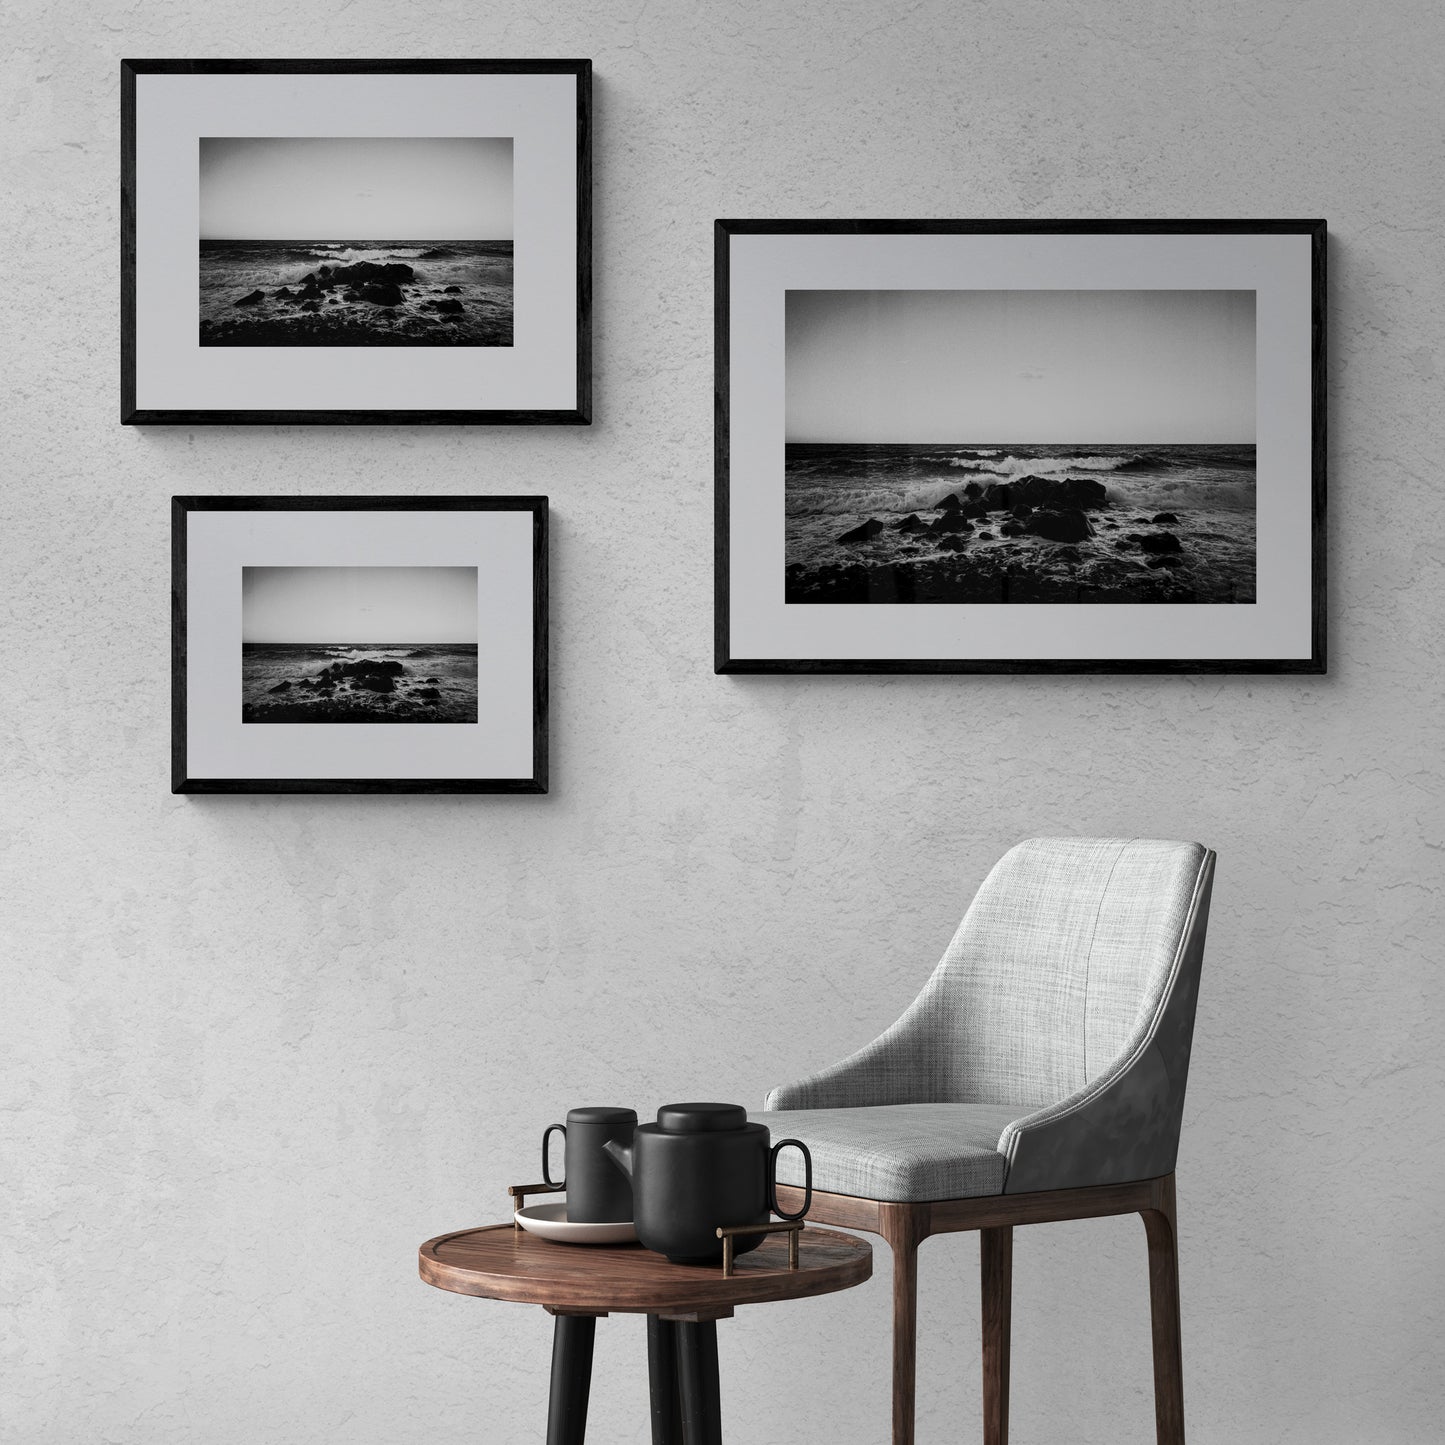 Santorini, Waves crushing on a boulder | Chorōs | Black-and-white wall art photography from Greece - framing options